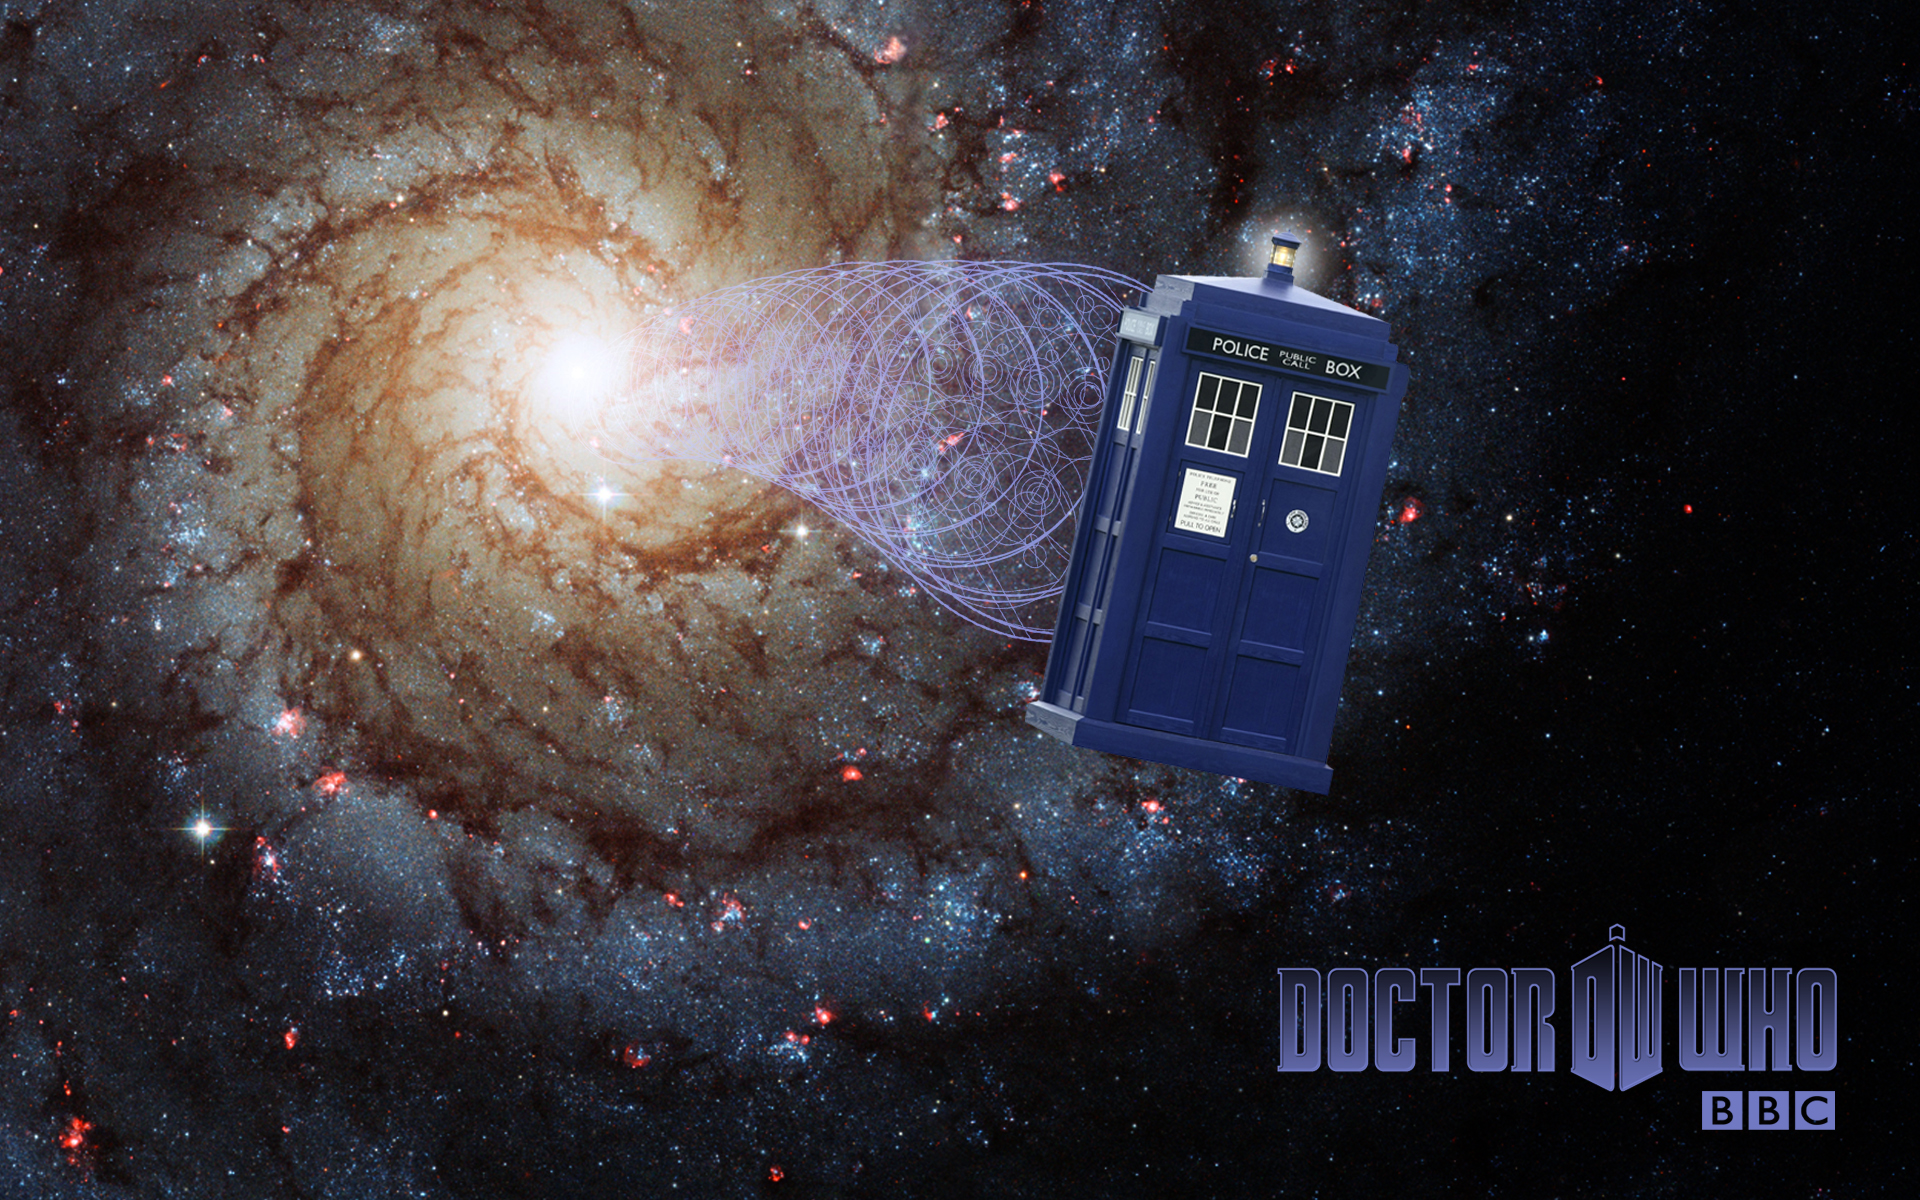 Doctor Who Wallpaper Tardis Pictures In High Definition Or